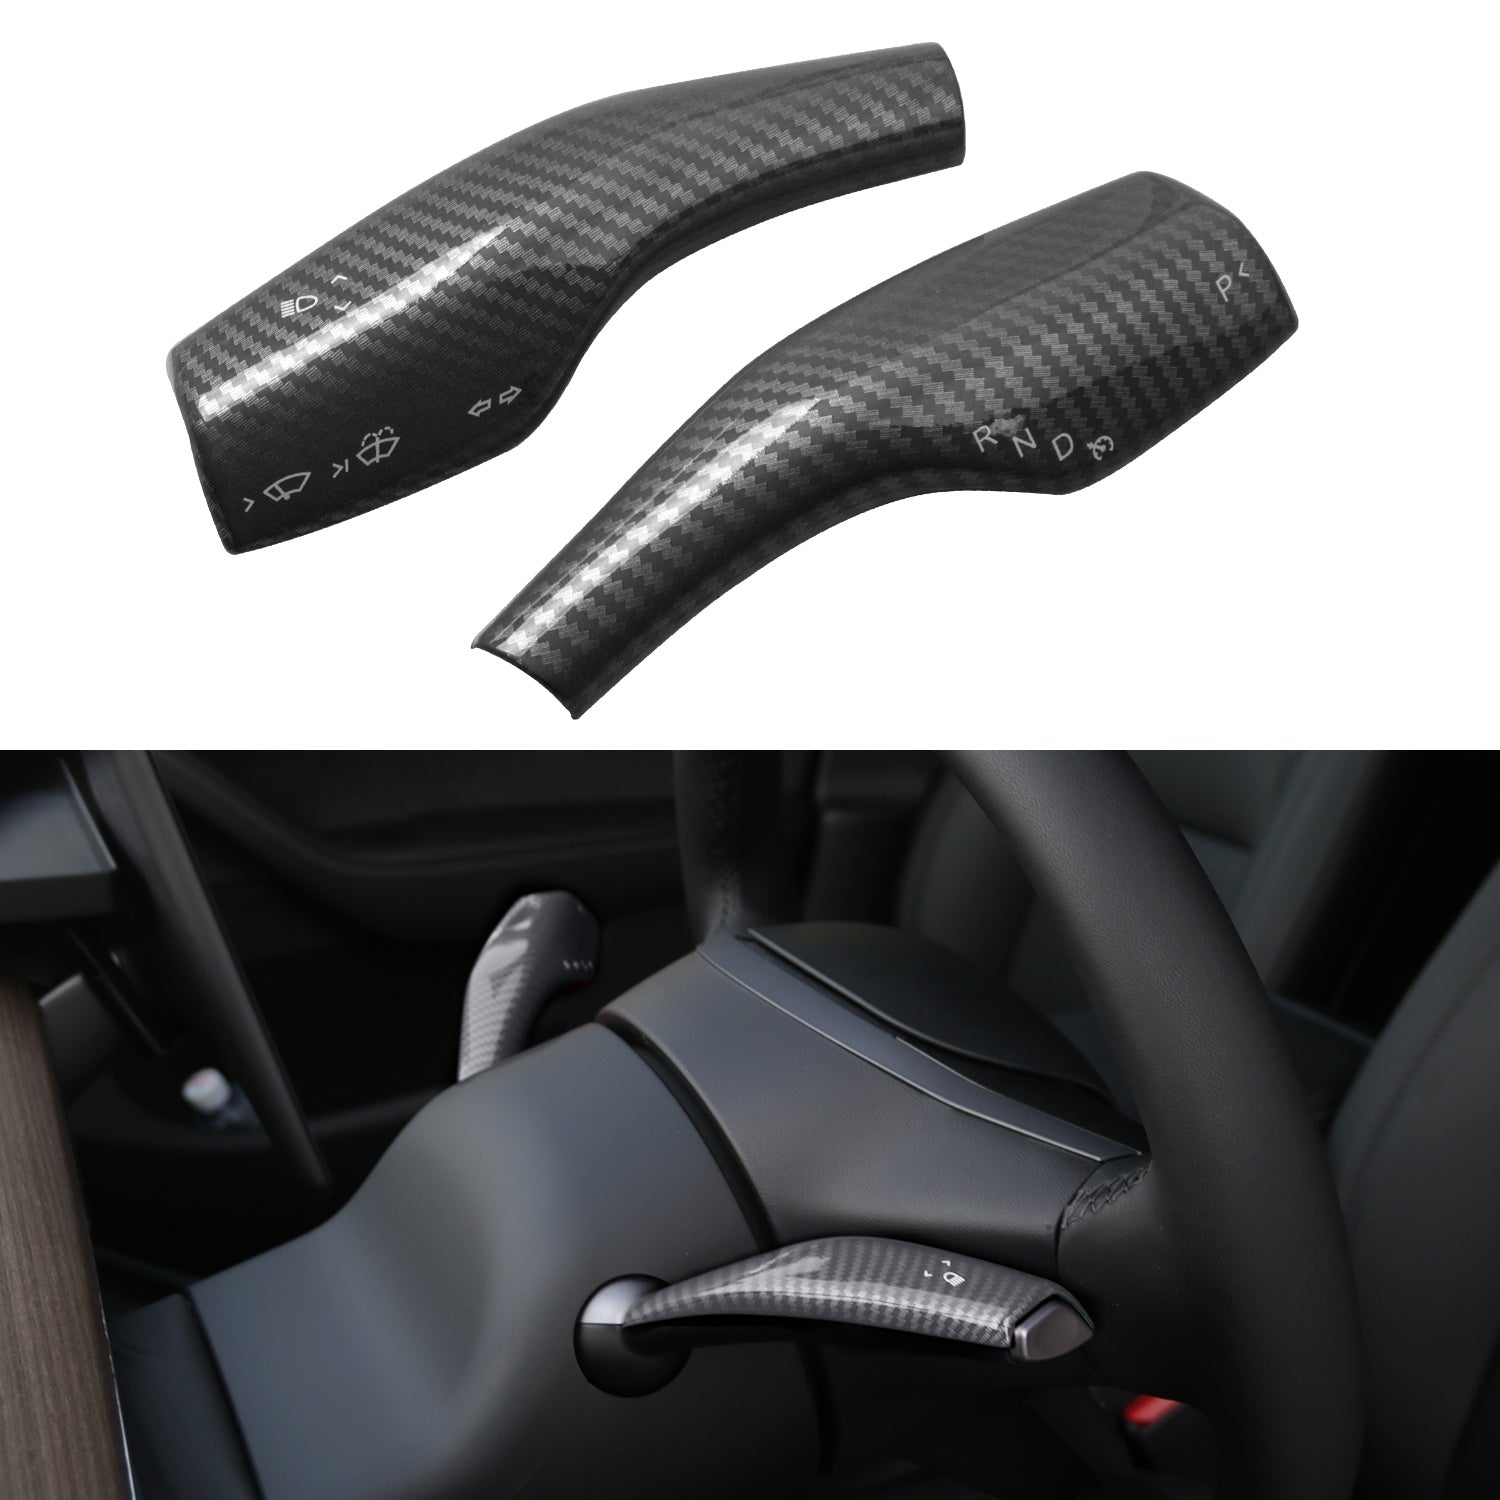 tesla model 3 Y X S car 2022 2023 2021 2020 2019 s3xy arcoche accessories accessory gear shift steering level cover real glossy matte black carbon fiber aftermarket price standard long range performance sr+ electric car rwd ev interior exterior diy decoration price elon musk must have white blue red 5 7 seats seat